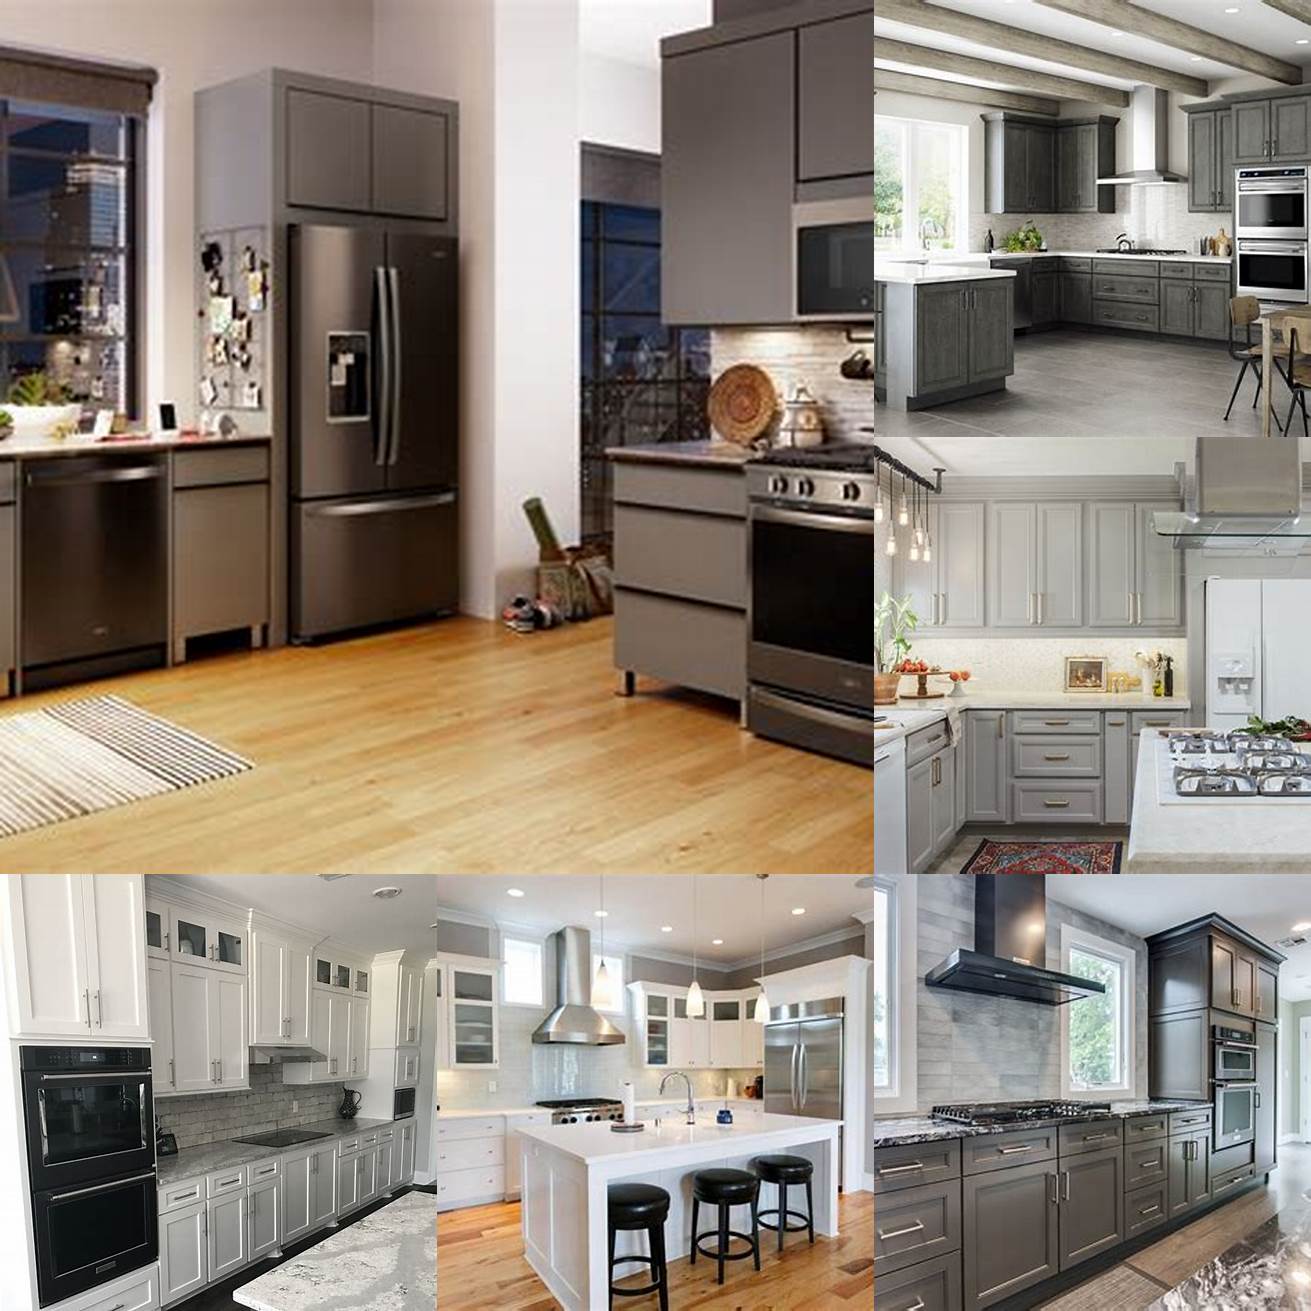 Grey walls with stainless steel appliances